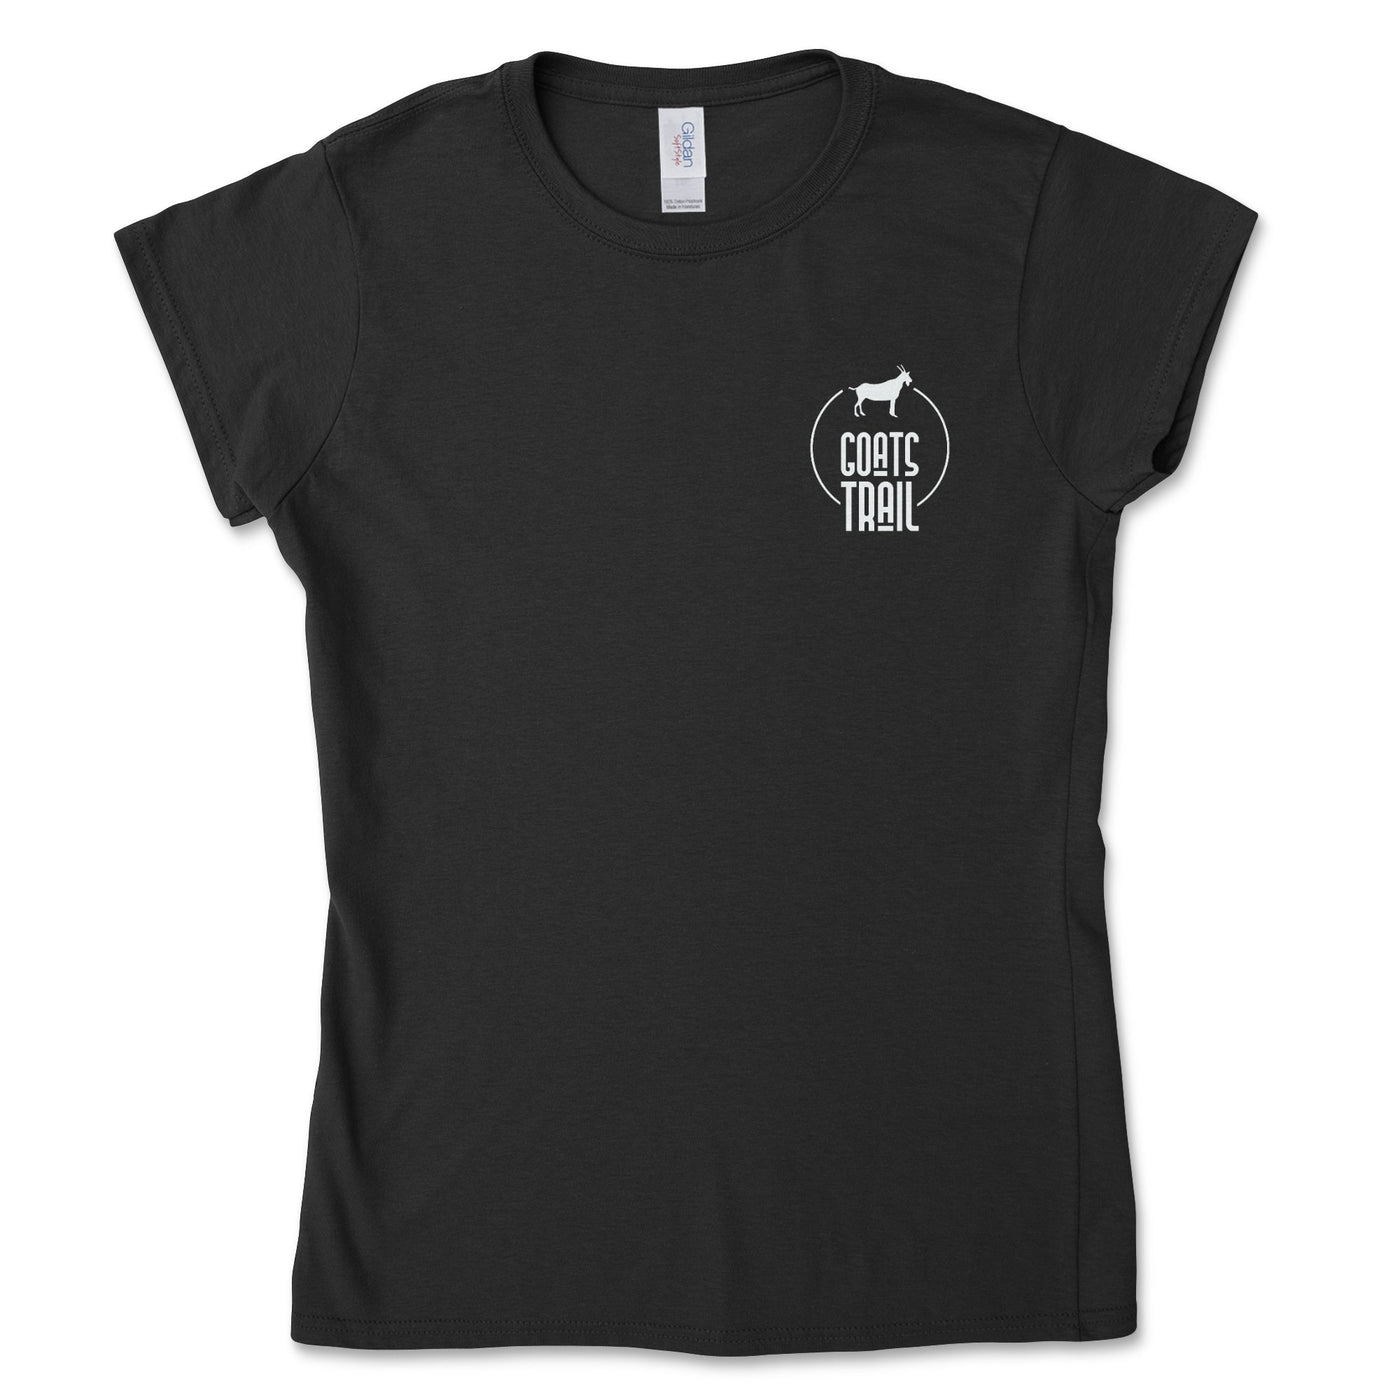 The Fun Begins Where the Road Ends Women's Tee - Goats Trail Off-Road Apparel Company